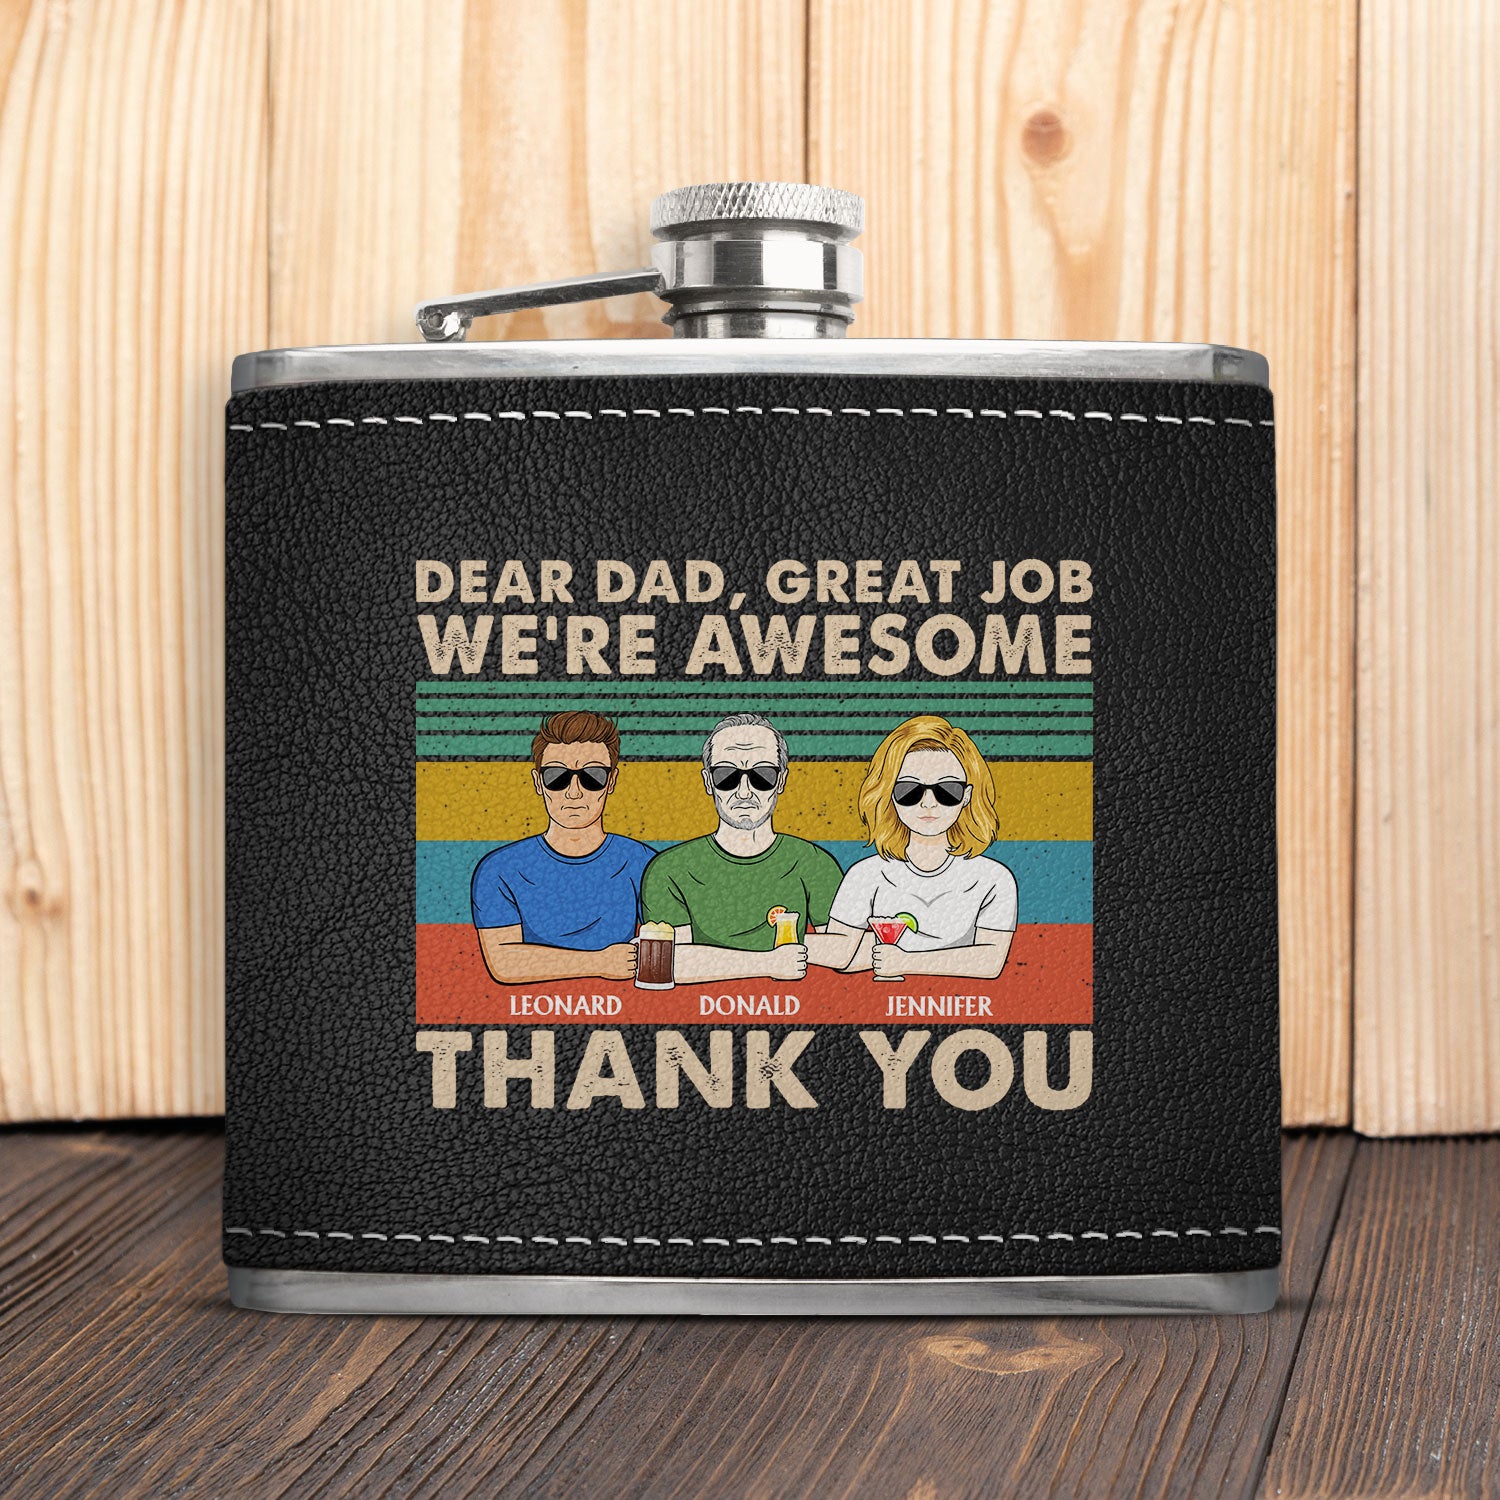 Dear Dad Great Job We're Awesome Thank You - Gift For Daddy, Grandpa, Father - Personalized Hip Flask